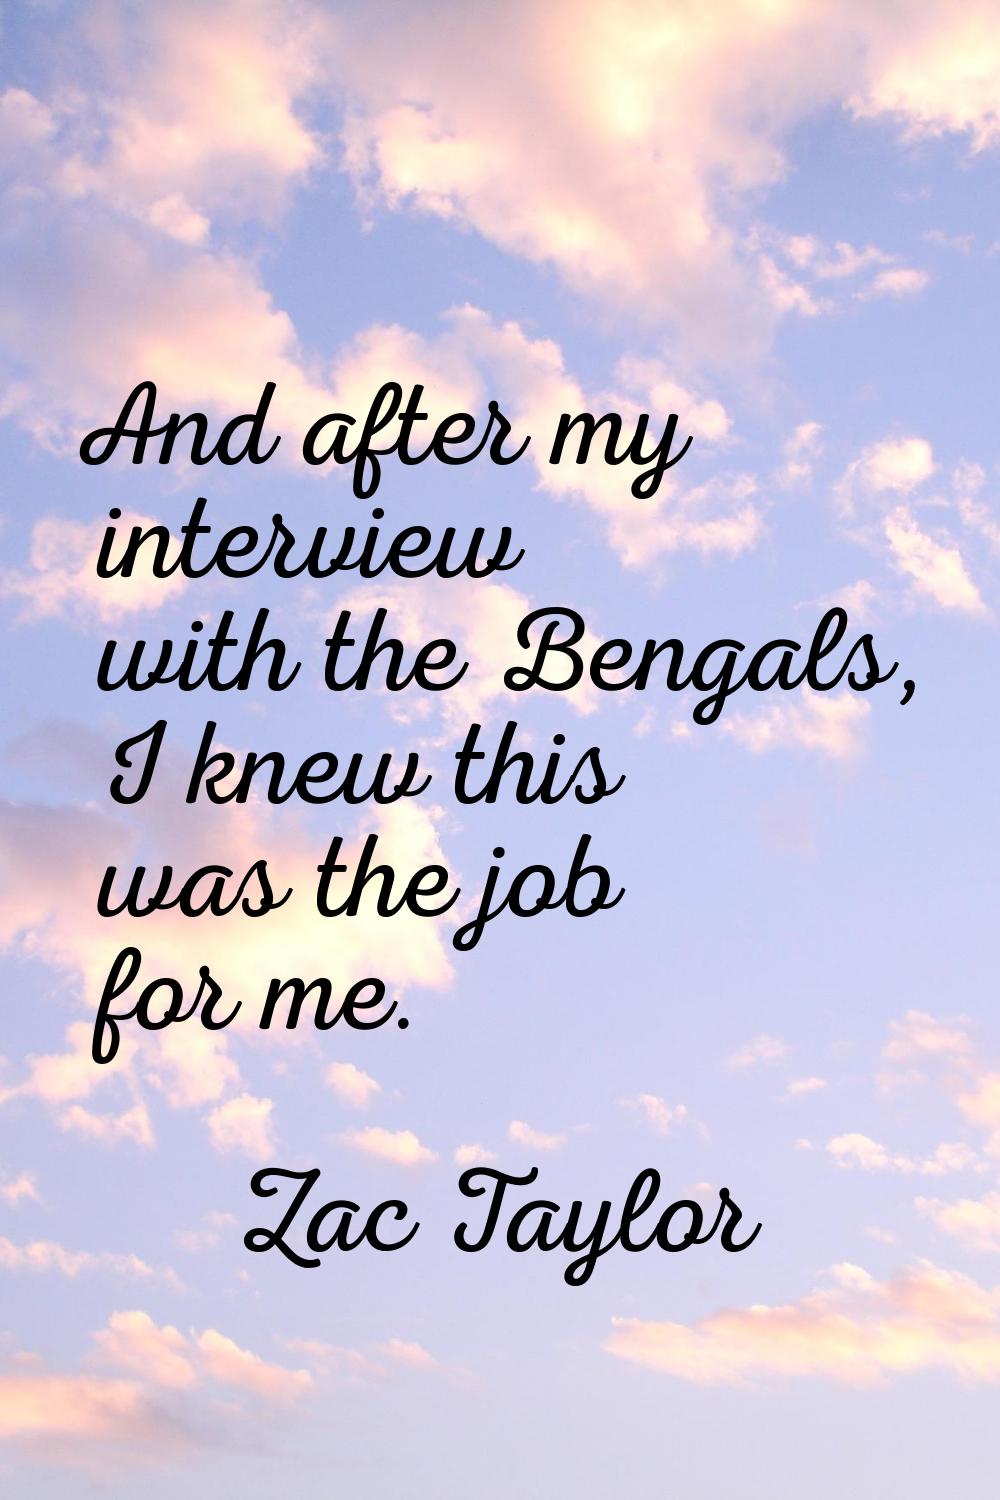 And after my interview with the Bengals, I knew this was the job for me.